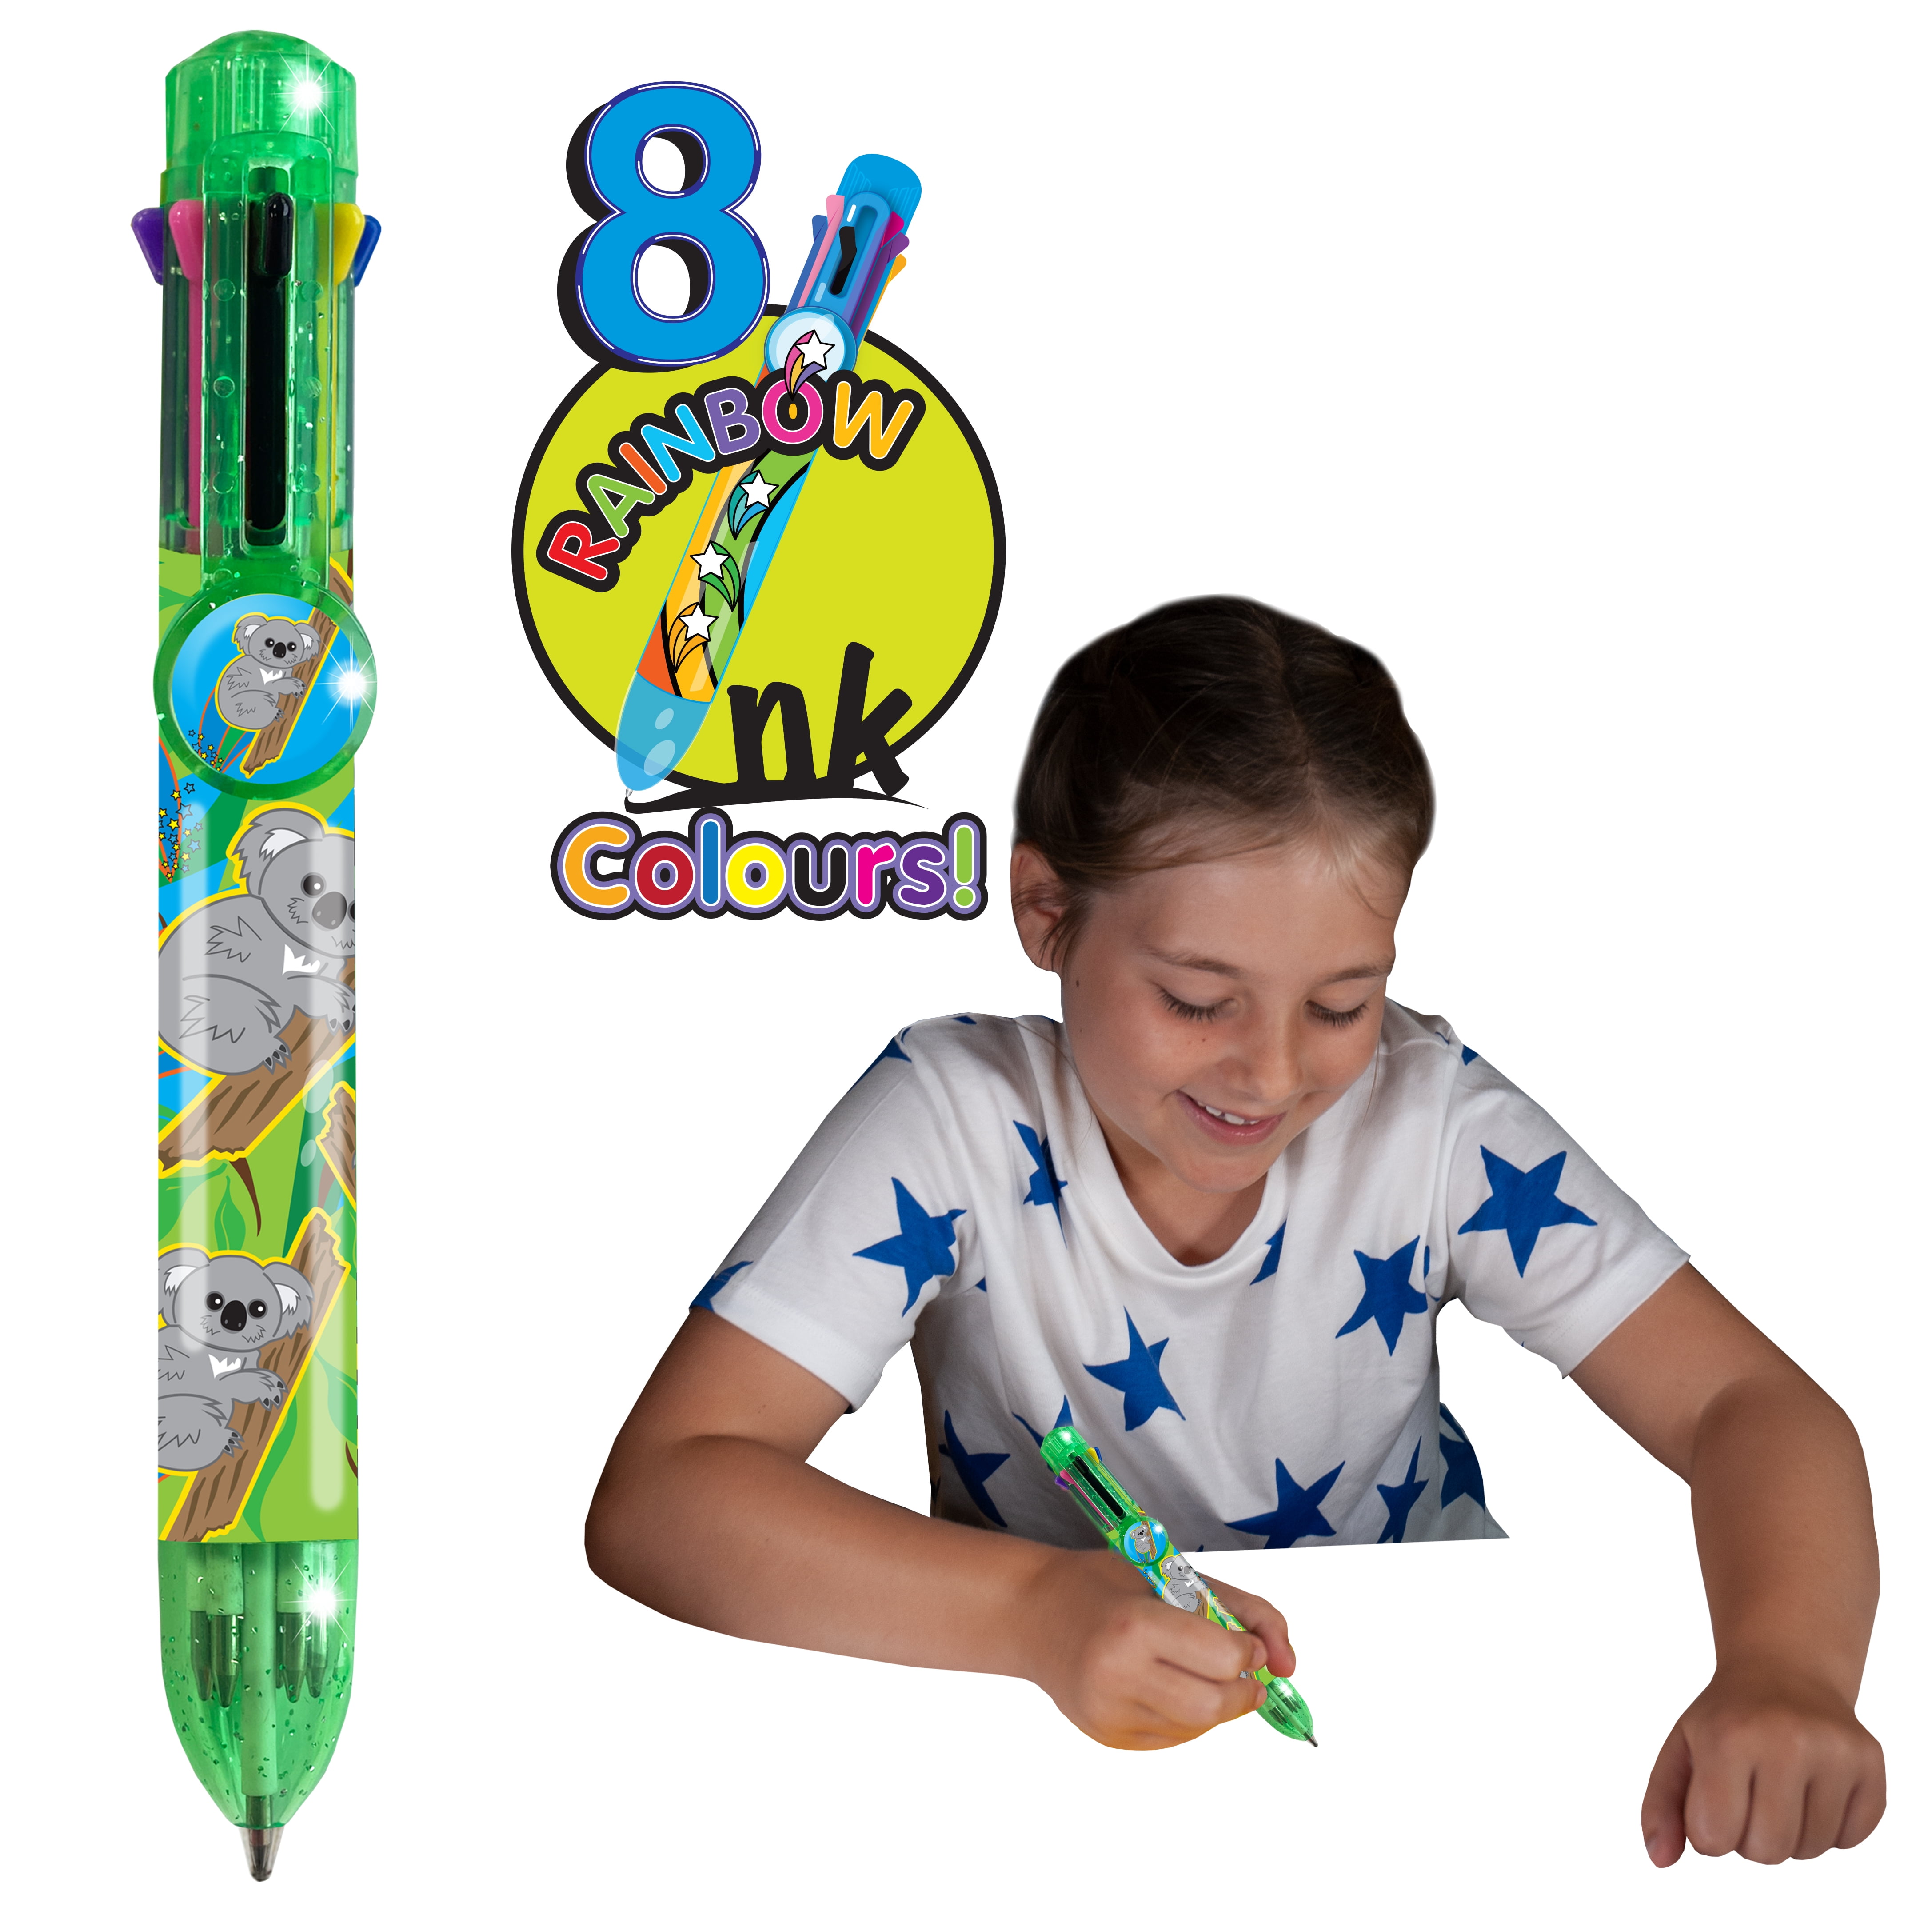 Rainbow Writer - Koala Multicolor Pen from Deluxebase. 8 in 1 Retractable  Ballpoint Pen. Colored Pens for Kids Back to School Supplies and Office  Supplies. Koala Pen Party Favors for Kids 